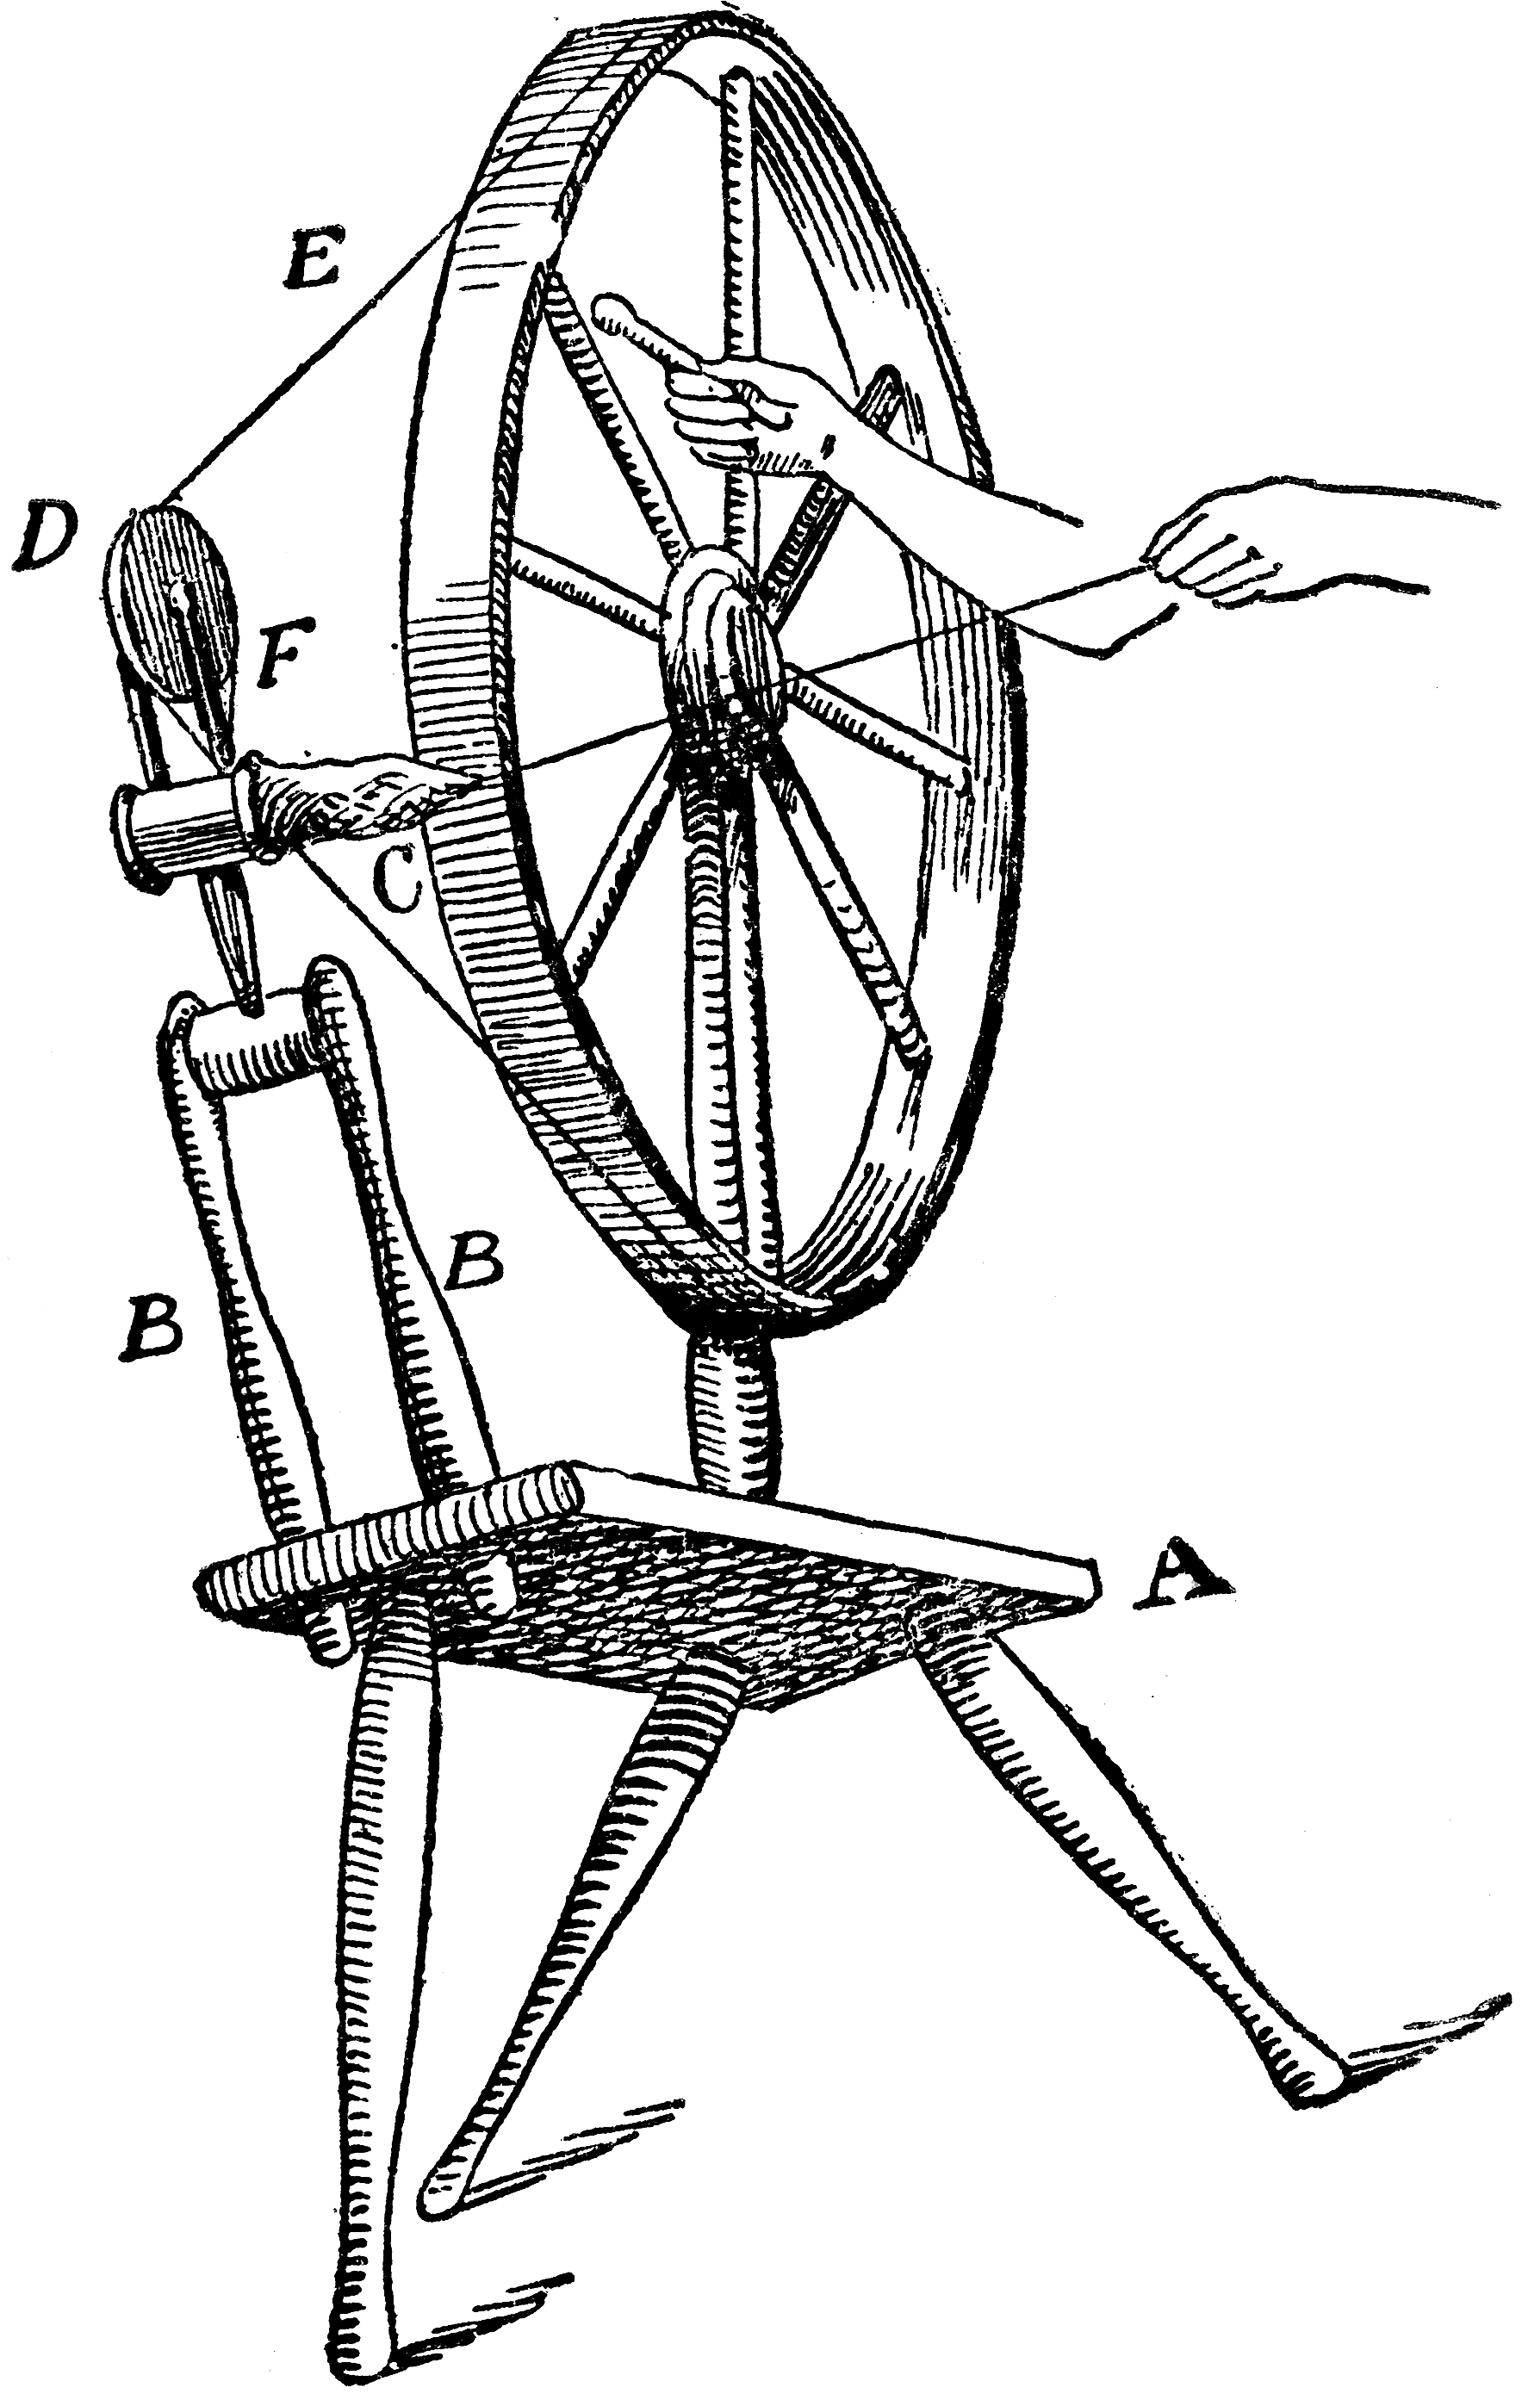 A Spinning Wheel | ClipArt ETC